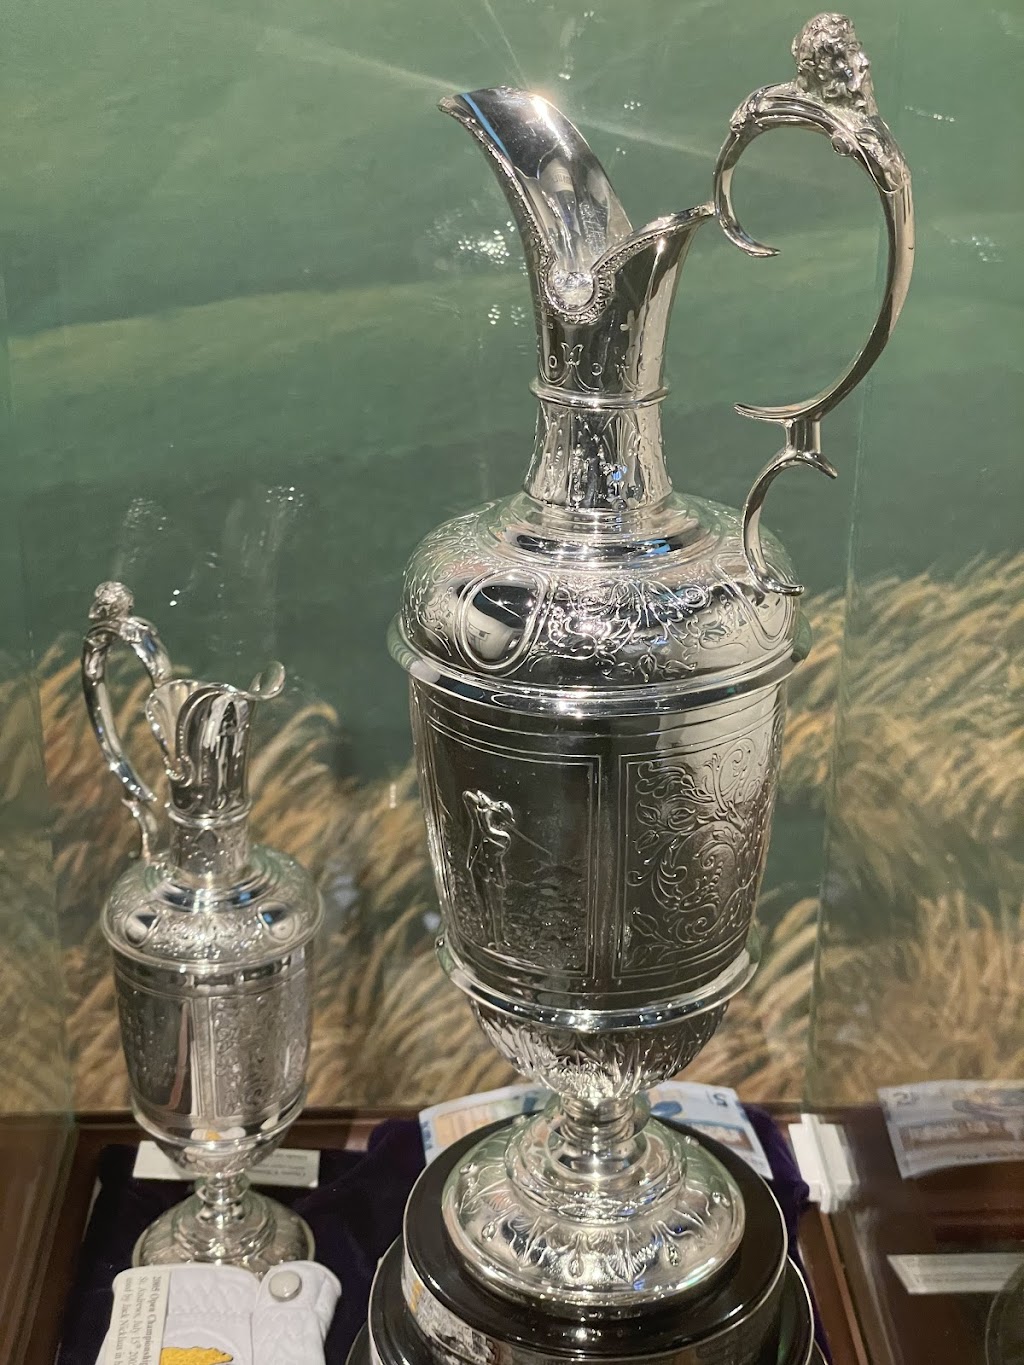 Jack Nicklaus Museum | 2355 Olentangy River Rd, Columbus, OH 43210, USA | Phone: (614) 247-5959